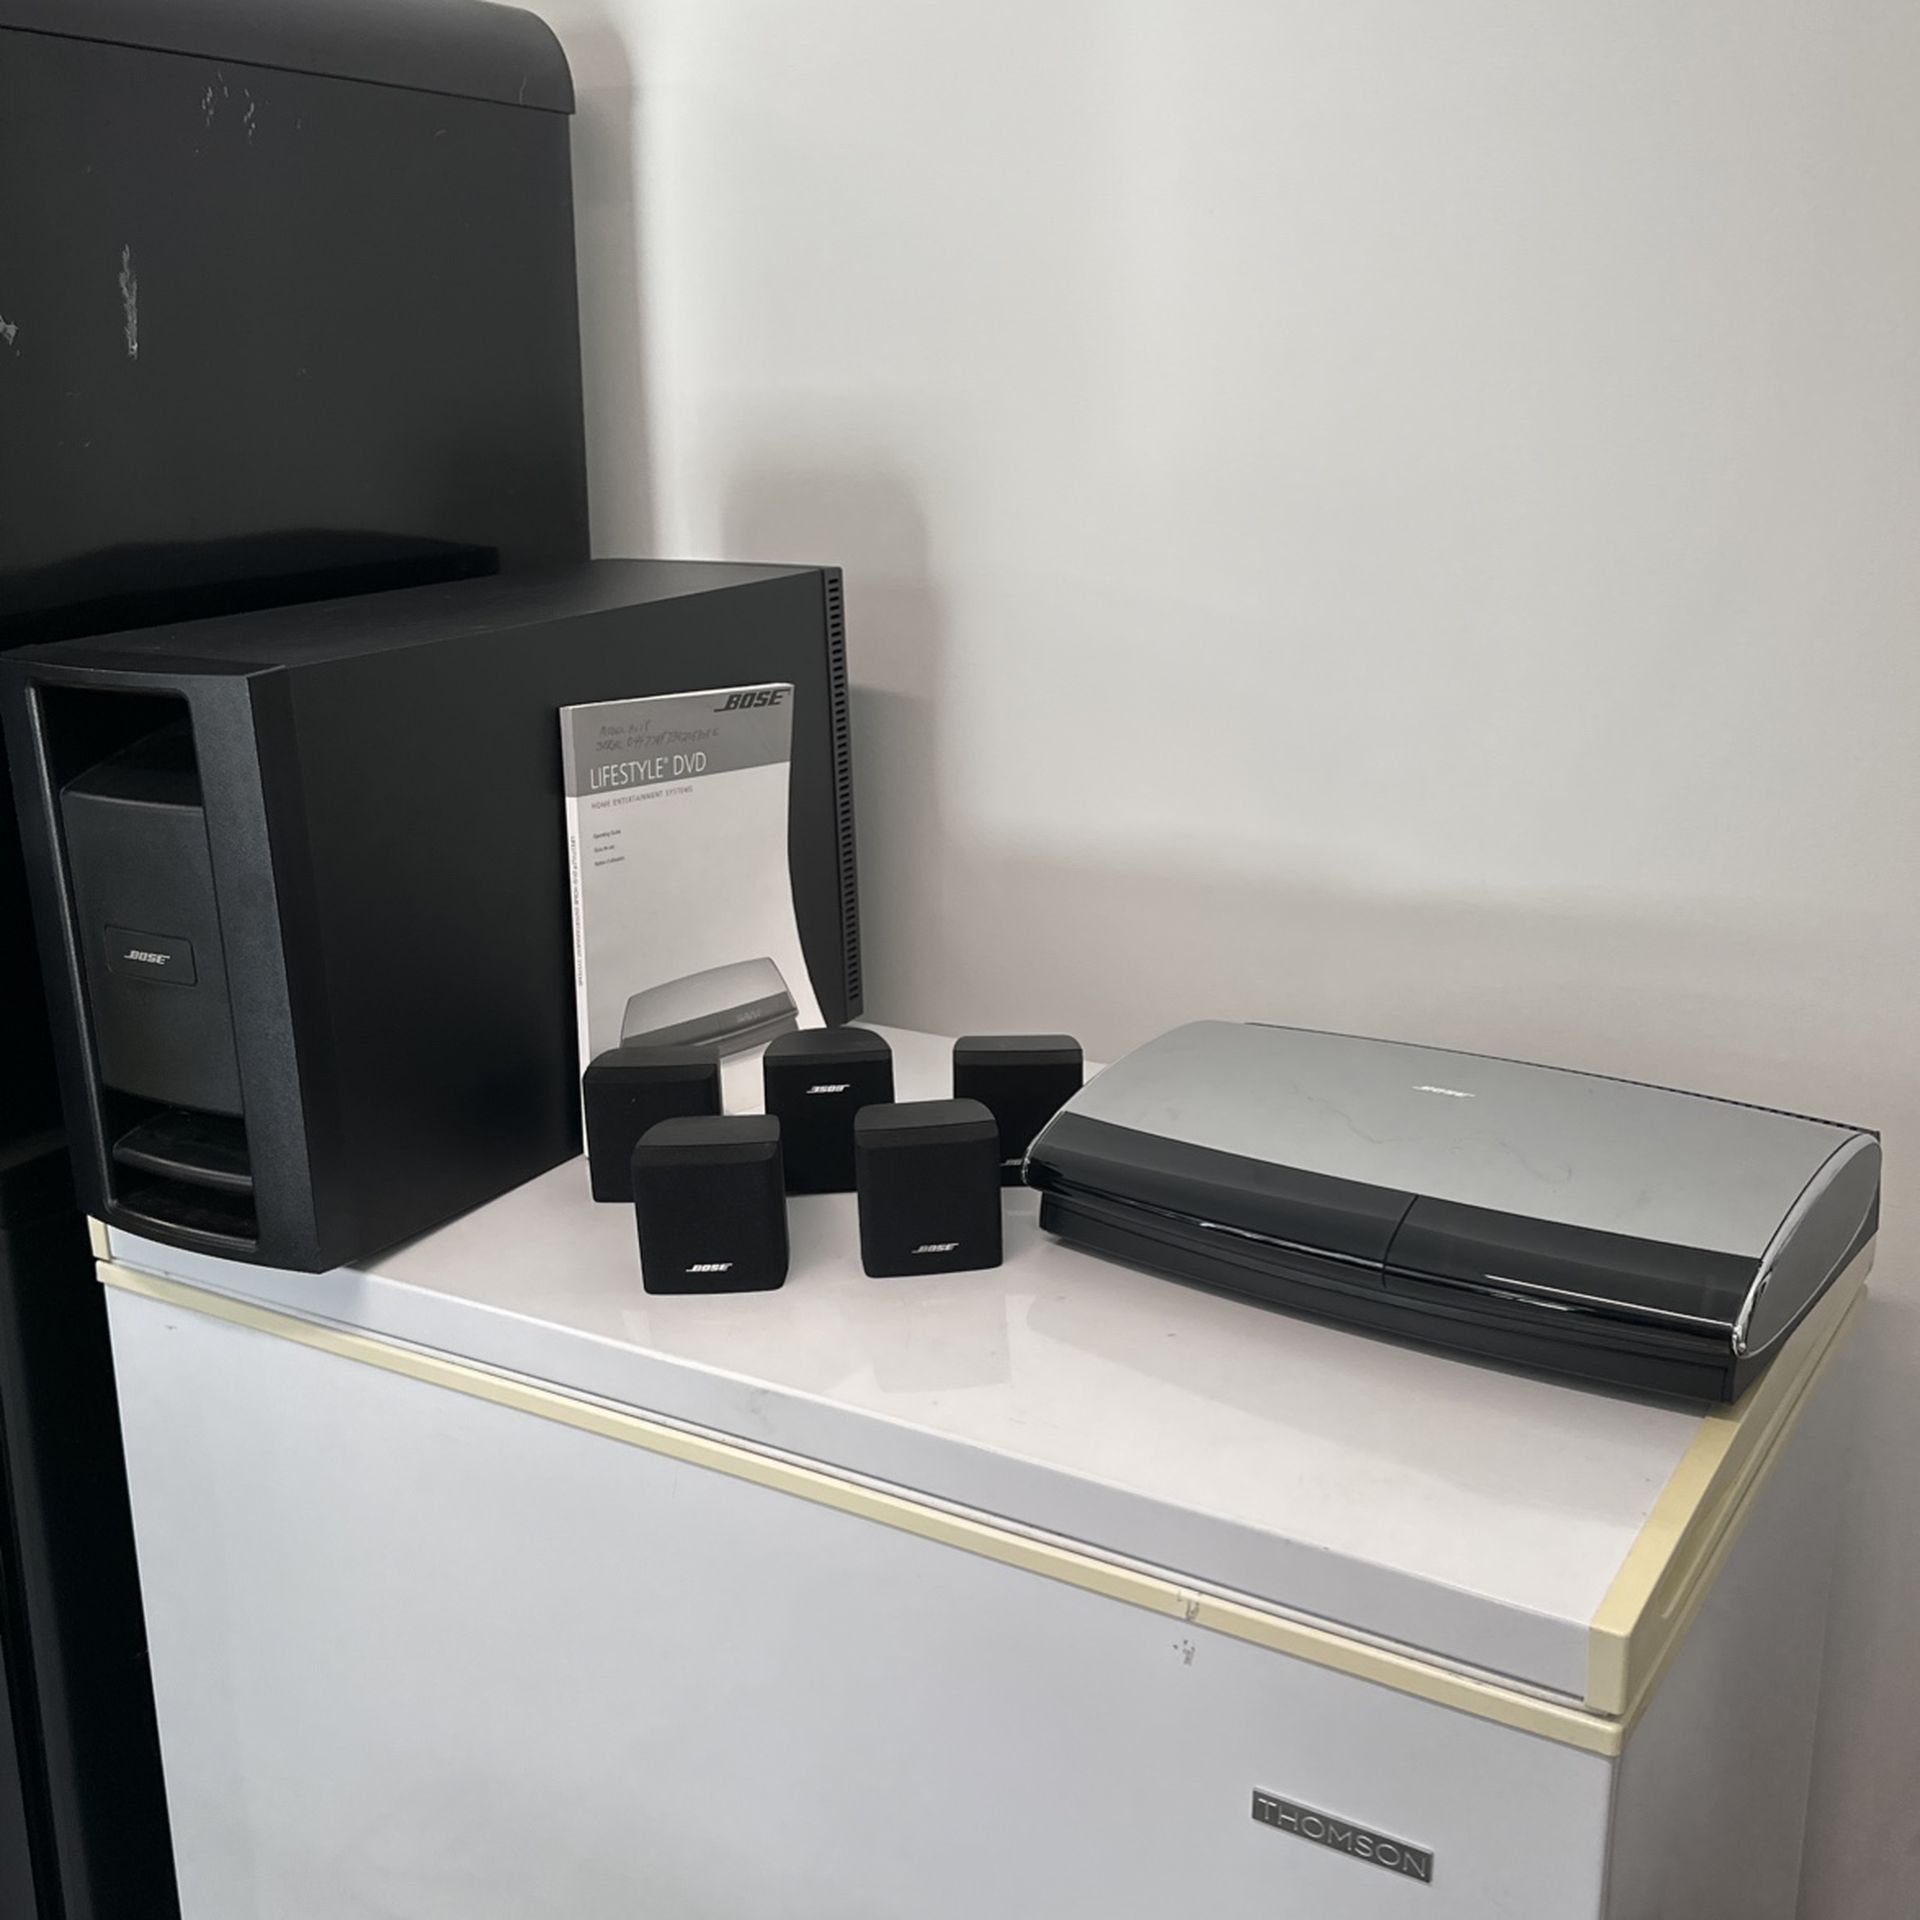  BOSE 5.1 Lifestyle 48 Series III Home Entertainment System 